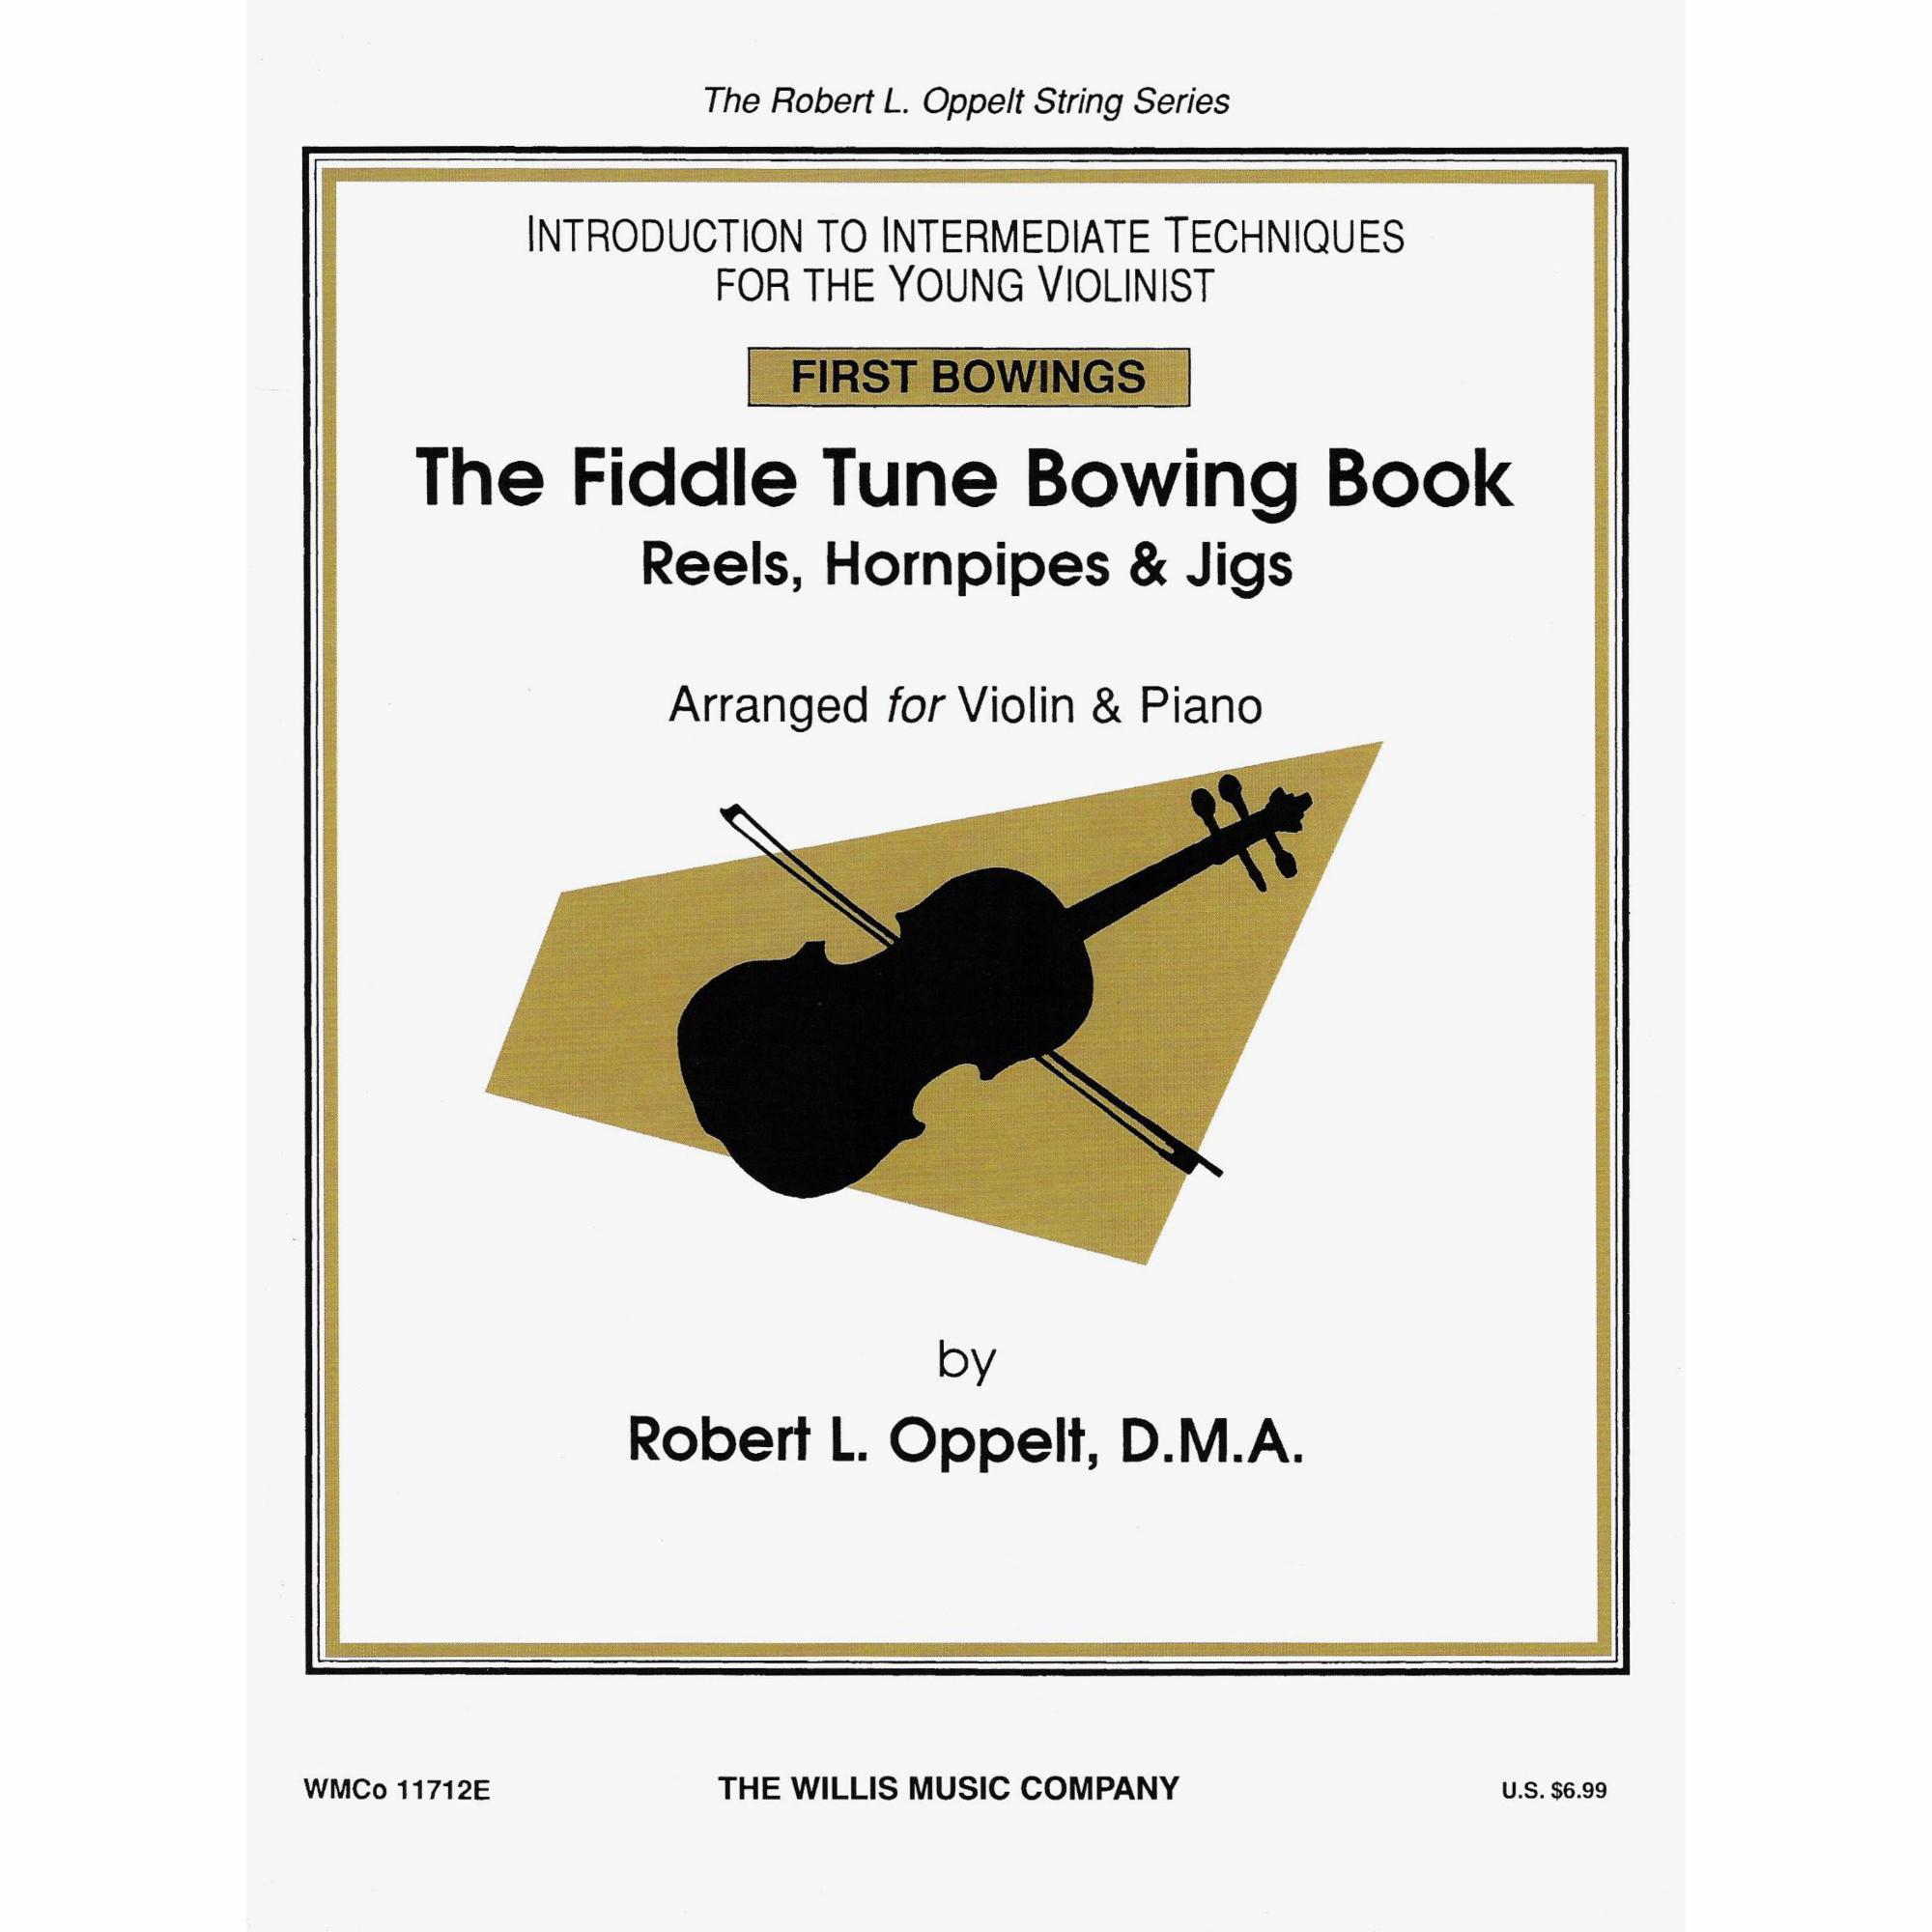 The Fiddle Tune Bowing Book